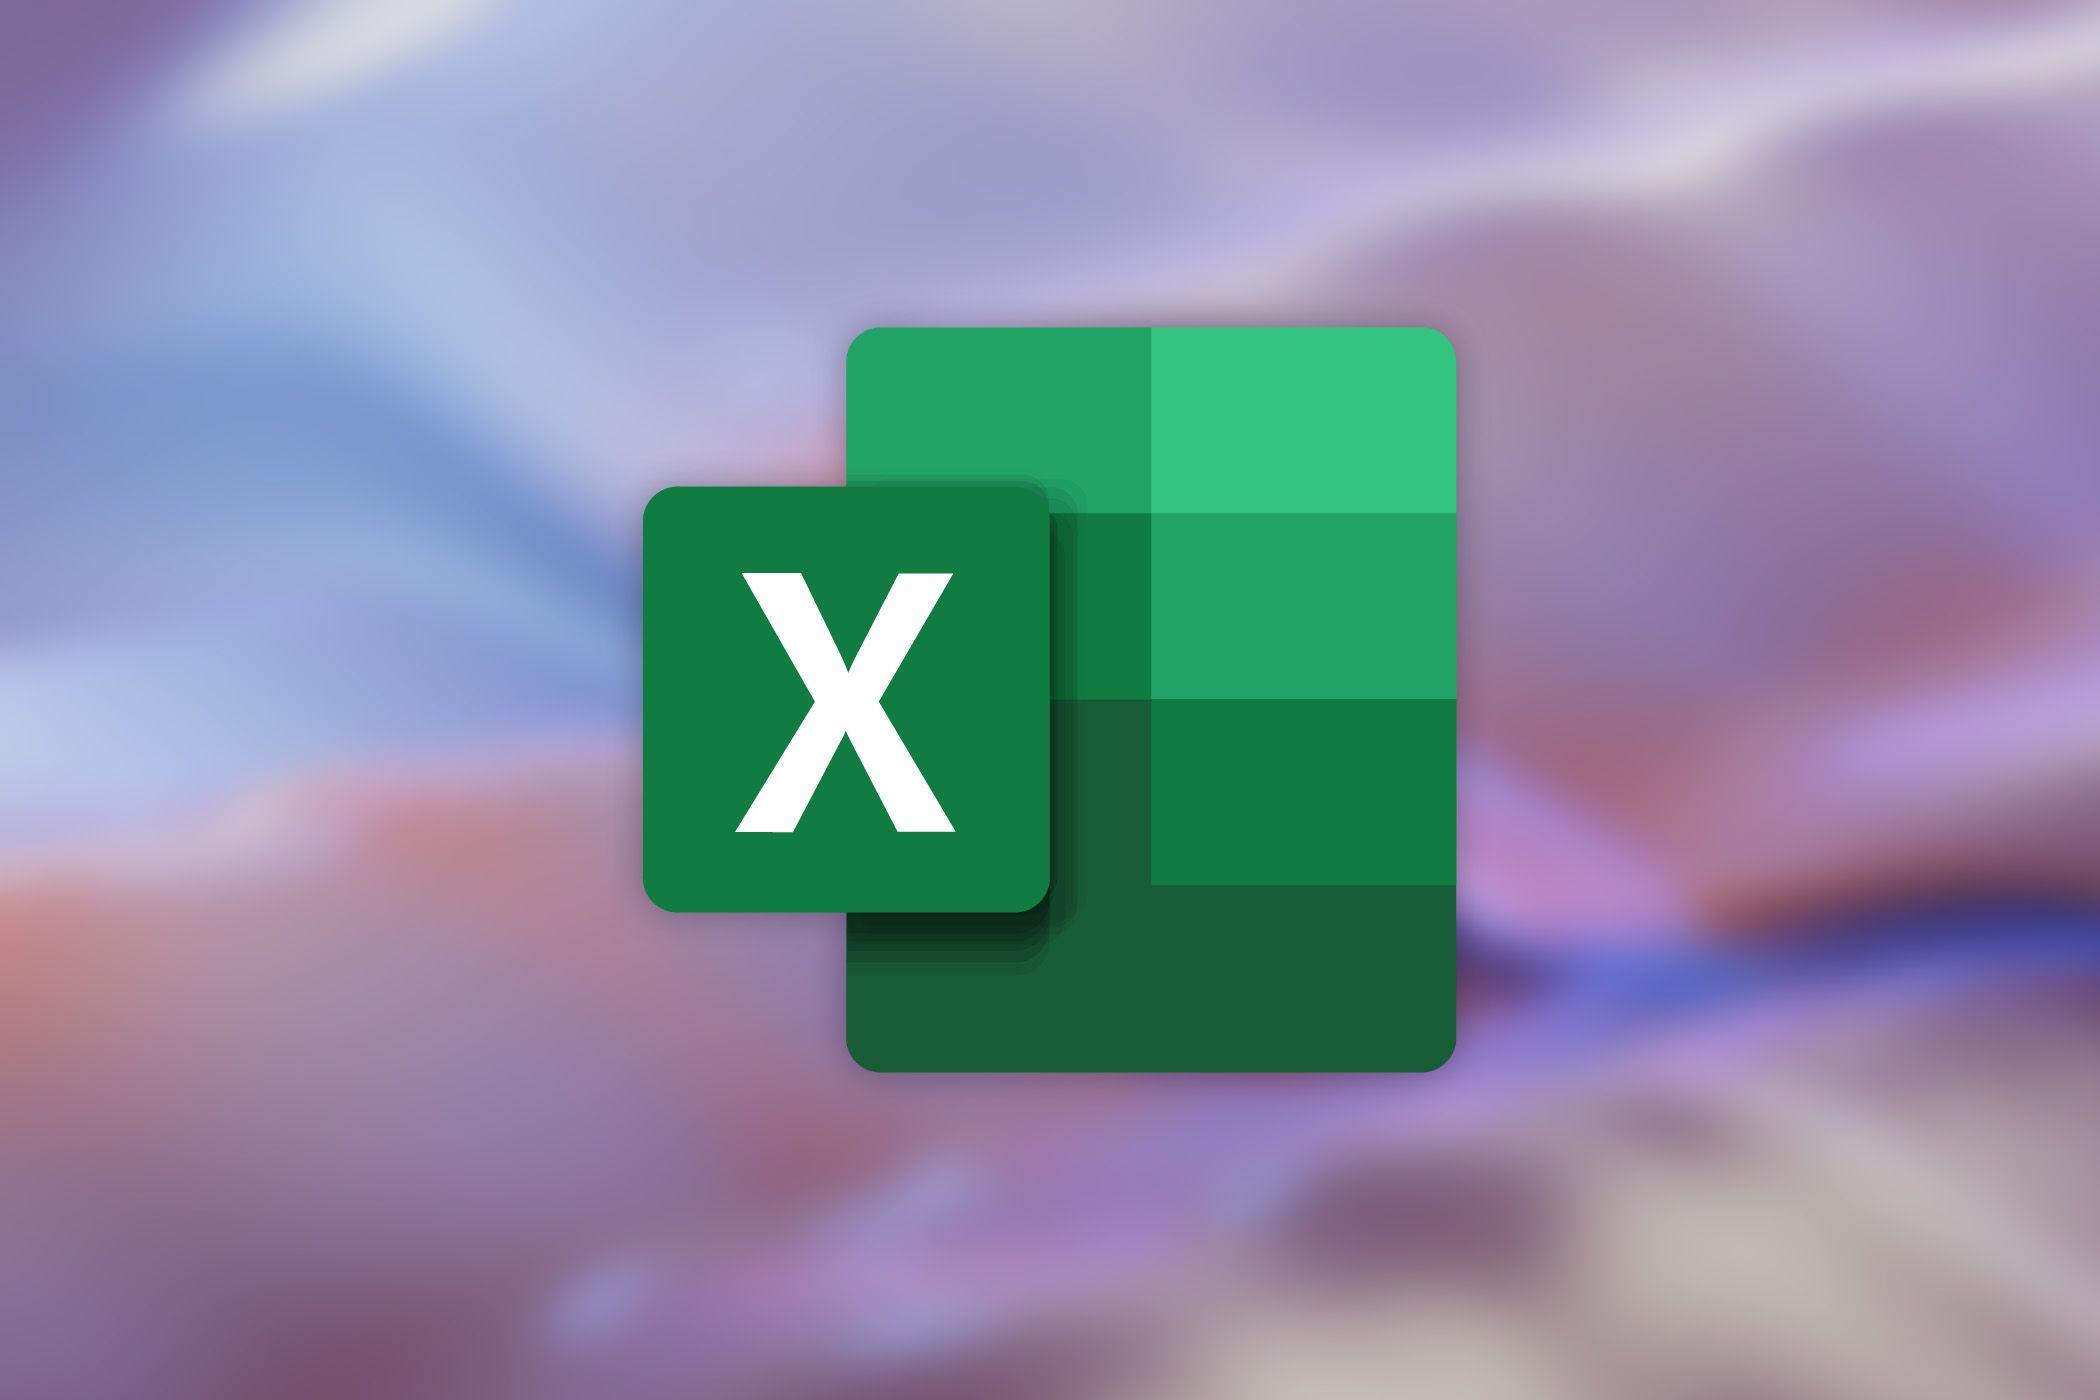 Microsoft Excel logo on a colorful background.